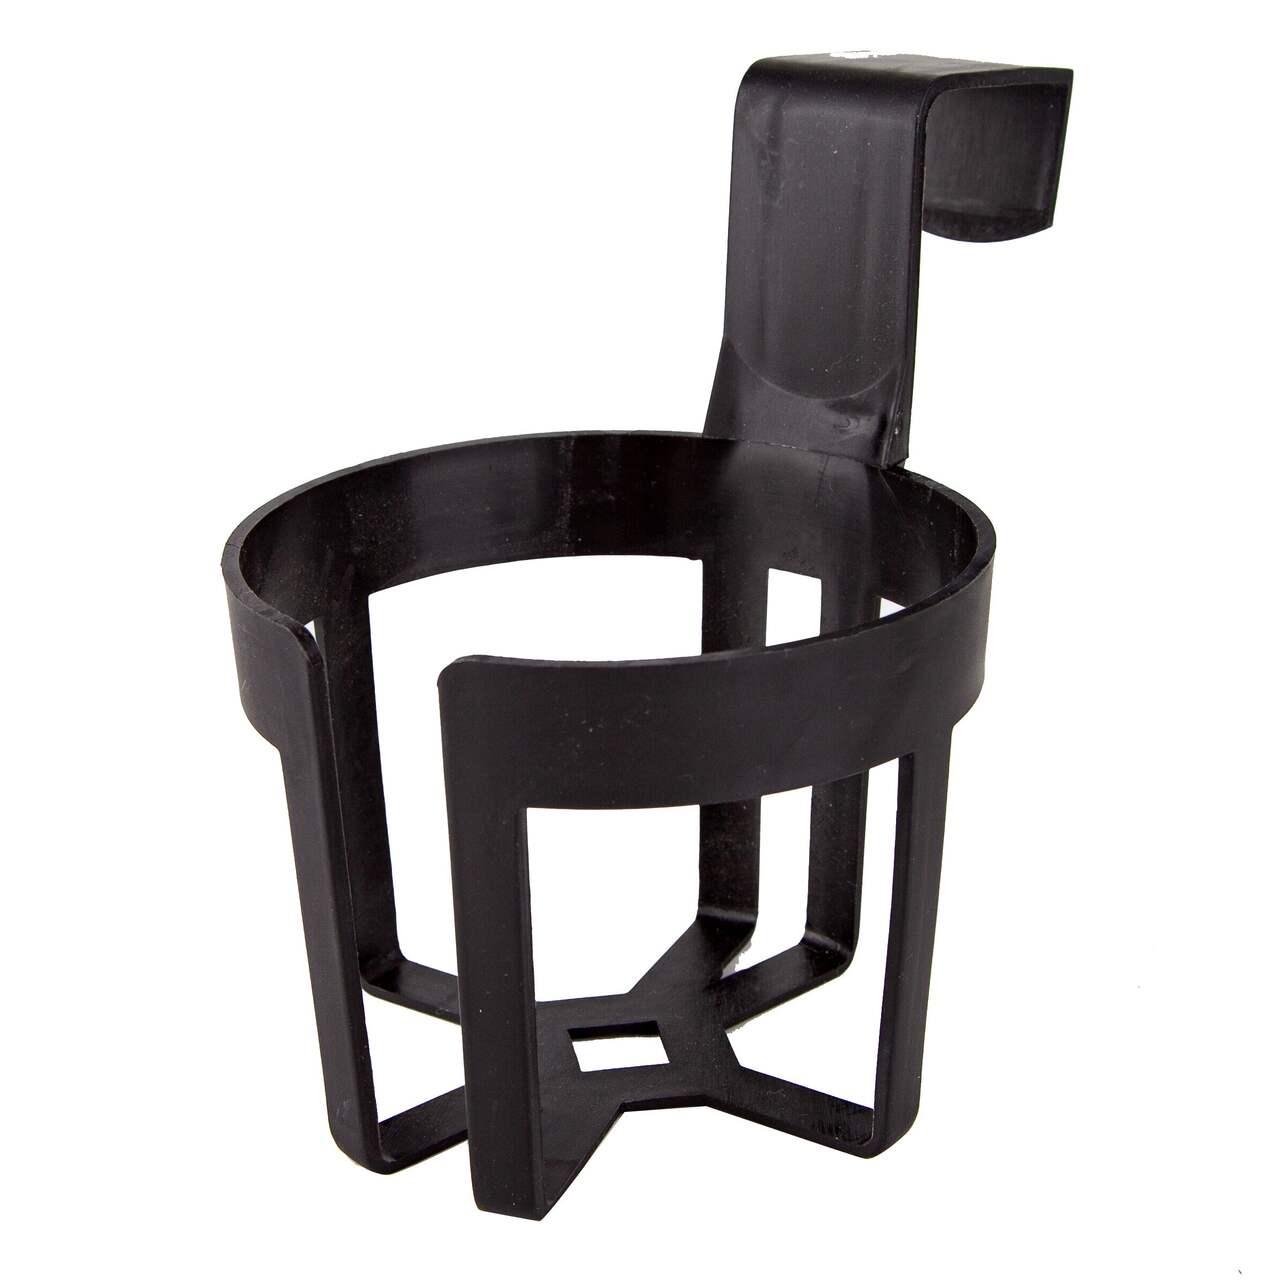 Large Cup Holder with Hook